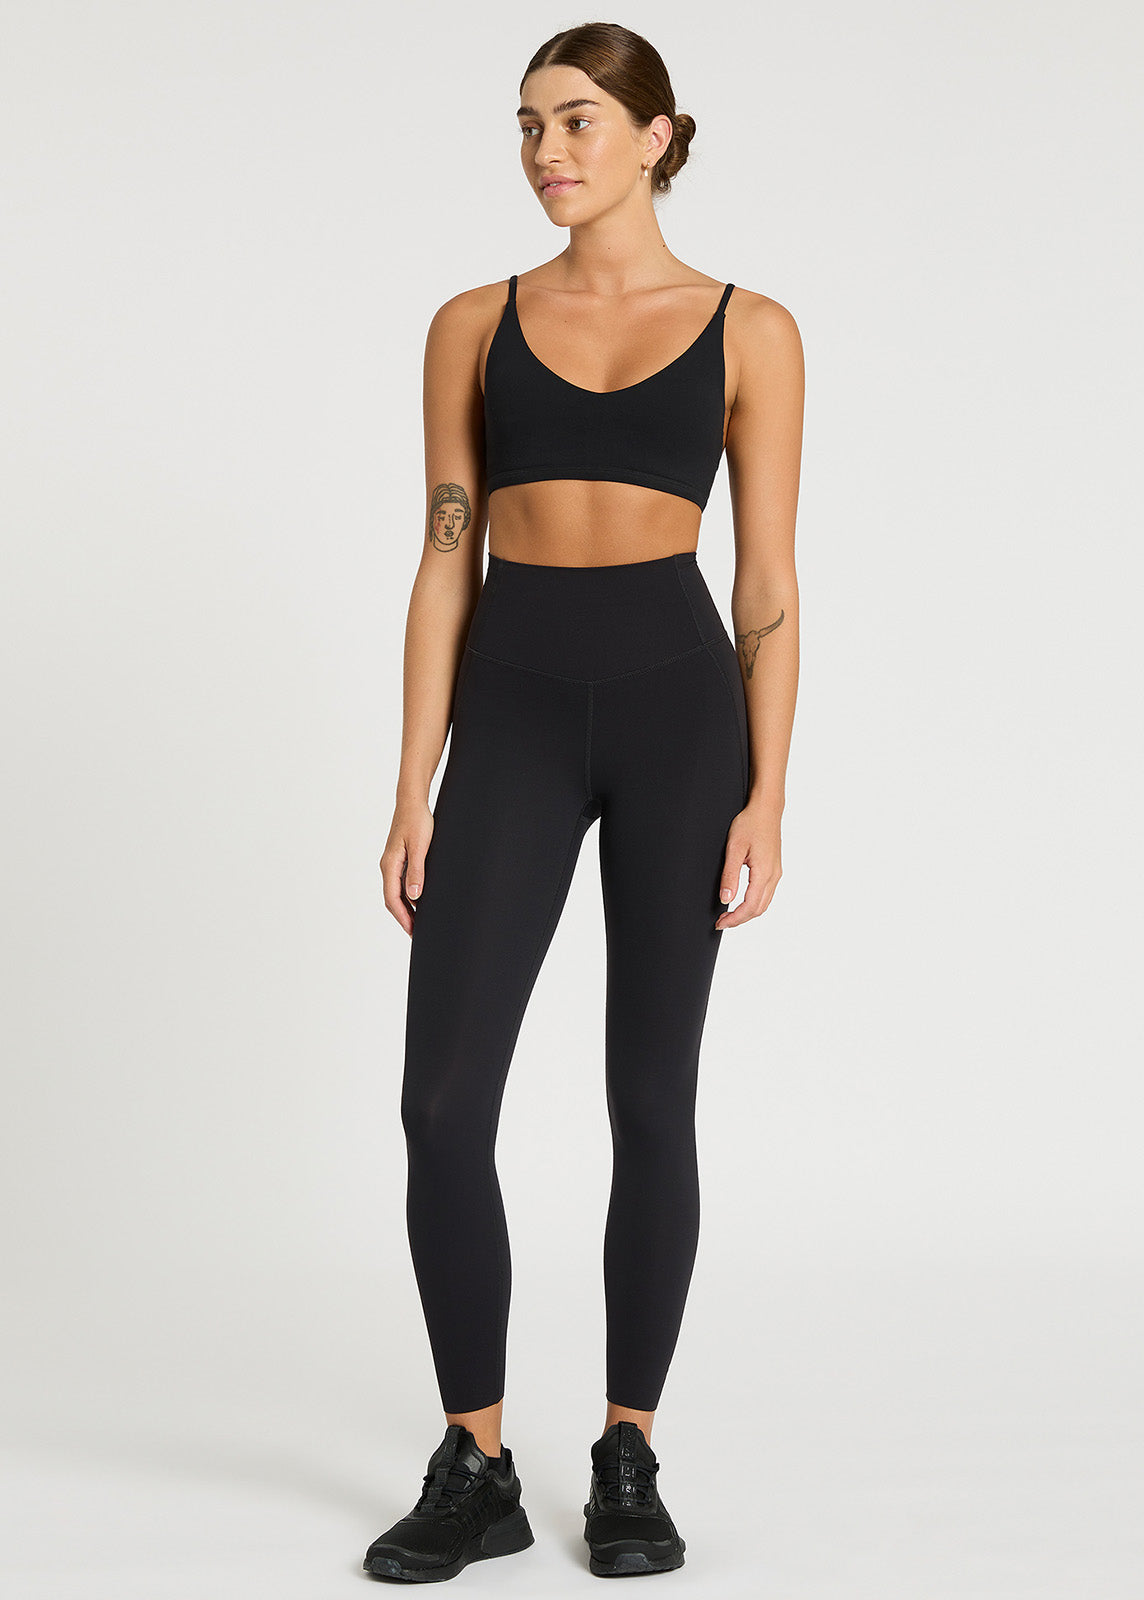 In Motion - Buttery soft studio activewear